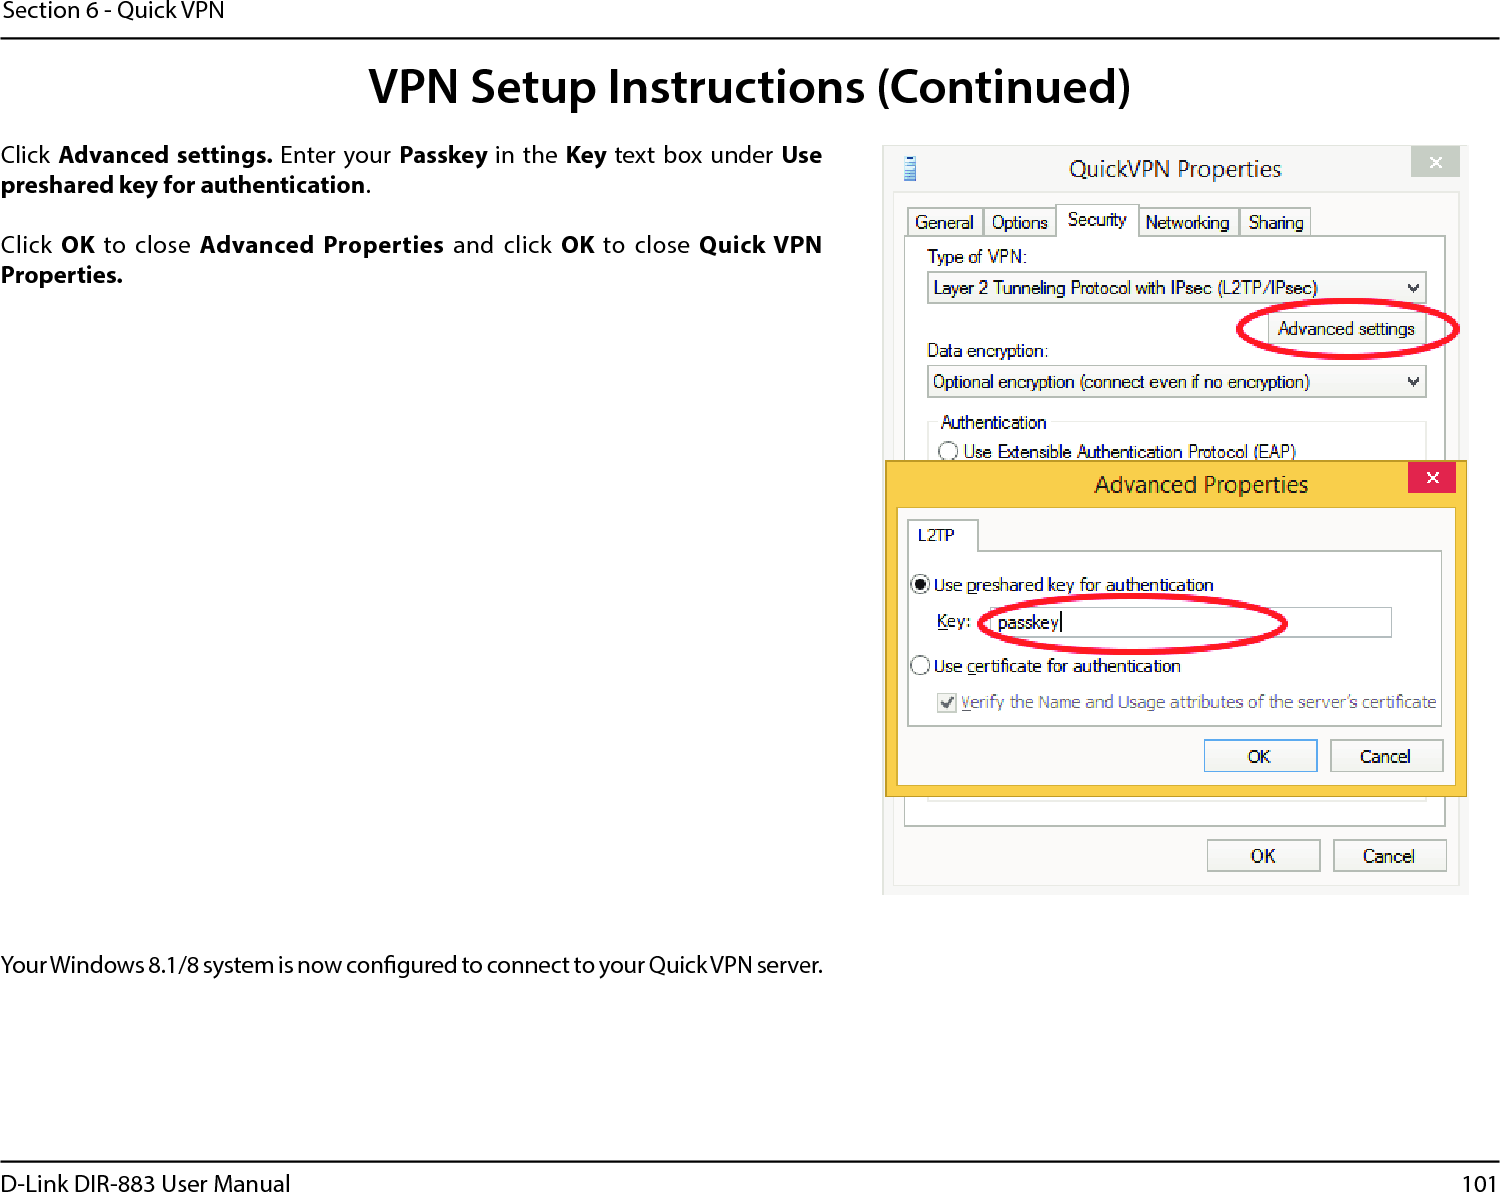 101D-Link DIR-883 User ManualSection 6 - Quick VPNClick Advanced settings. Enter your Passkey in the Key text box under Use preshared key for authentication.Click OK to close Advanced  Properties and click OK to  close  Quick VPN Properties.Your Windows 8.1/8 system is now congured to connect to your Quick VPN server.VPN Setup Instructions (Continued)